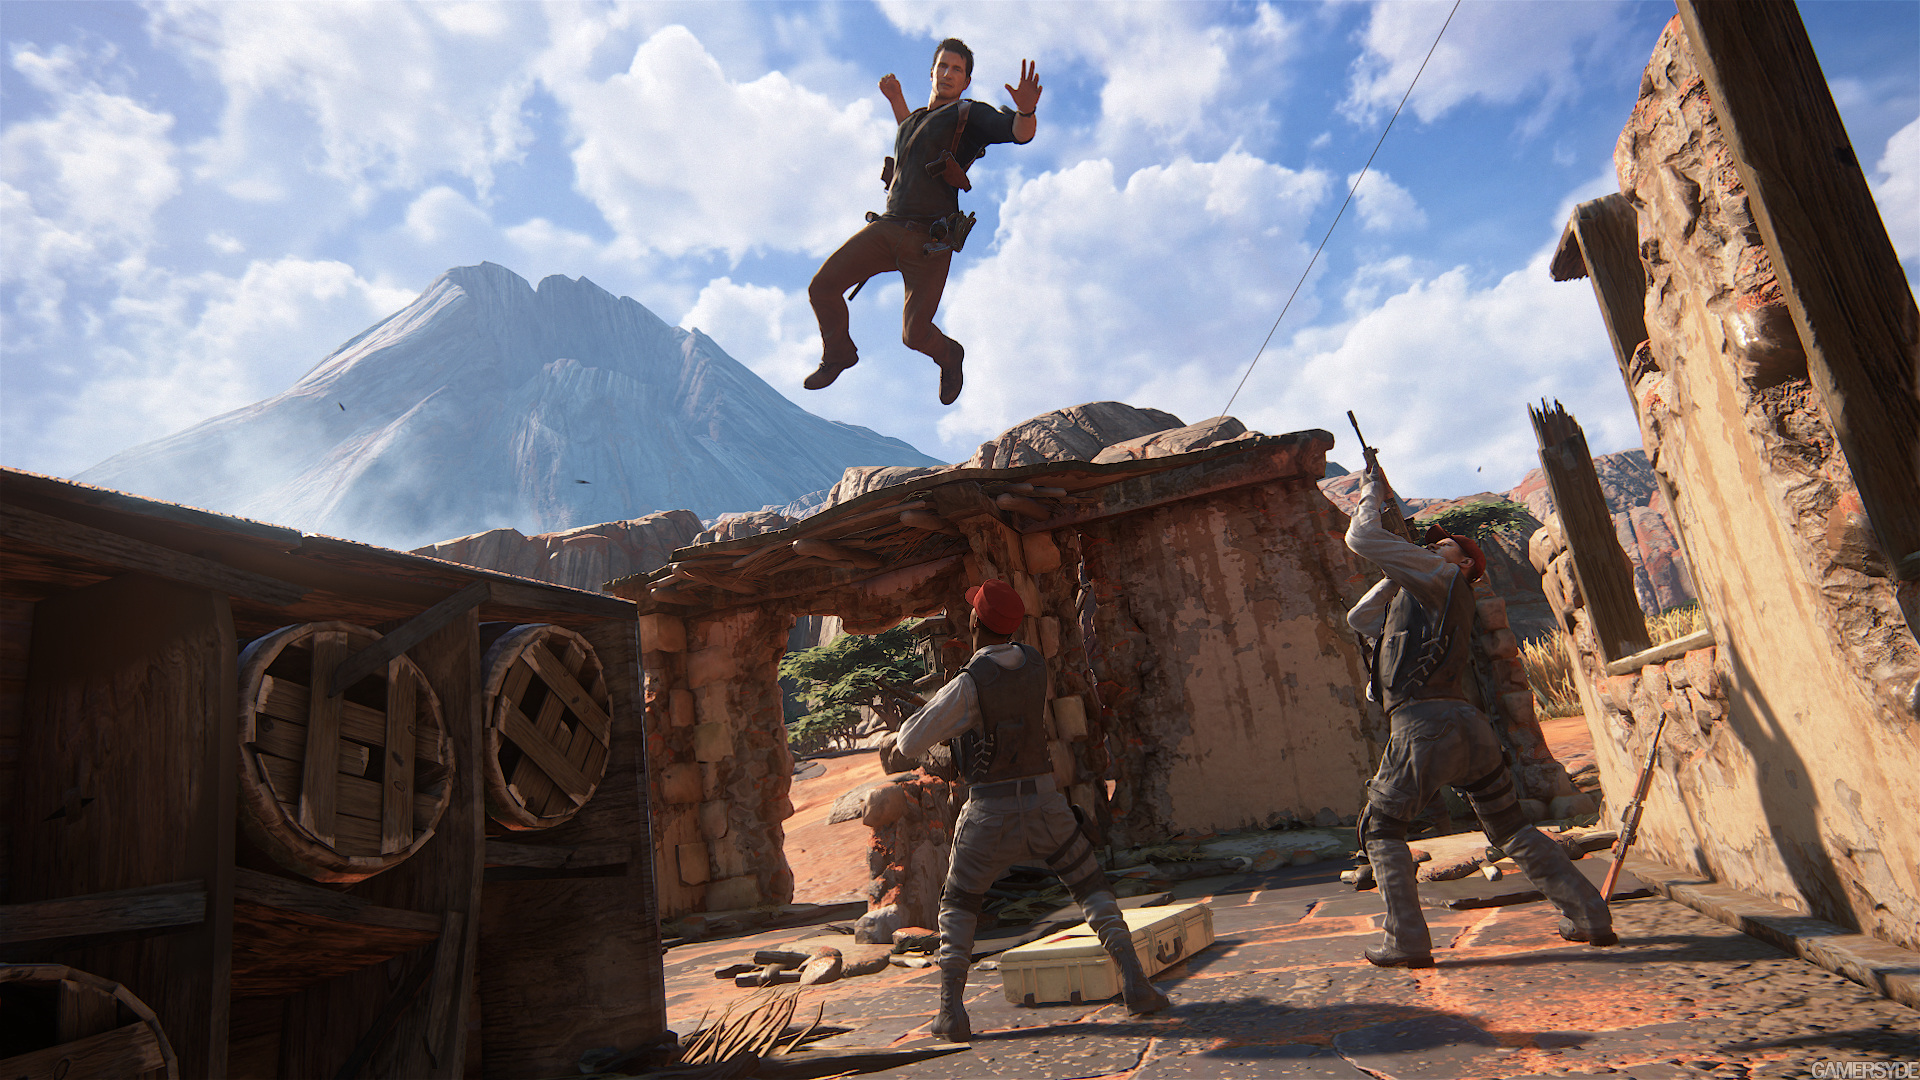 [Imagen: image_uncharted_4_a_thief_s_end-31382-2995_0003.jpg]